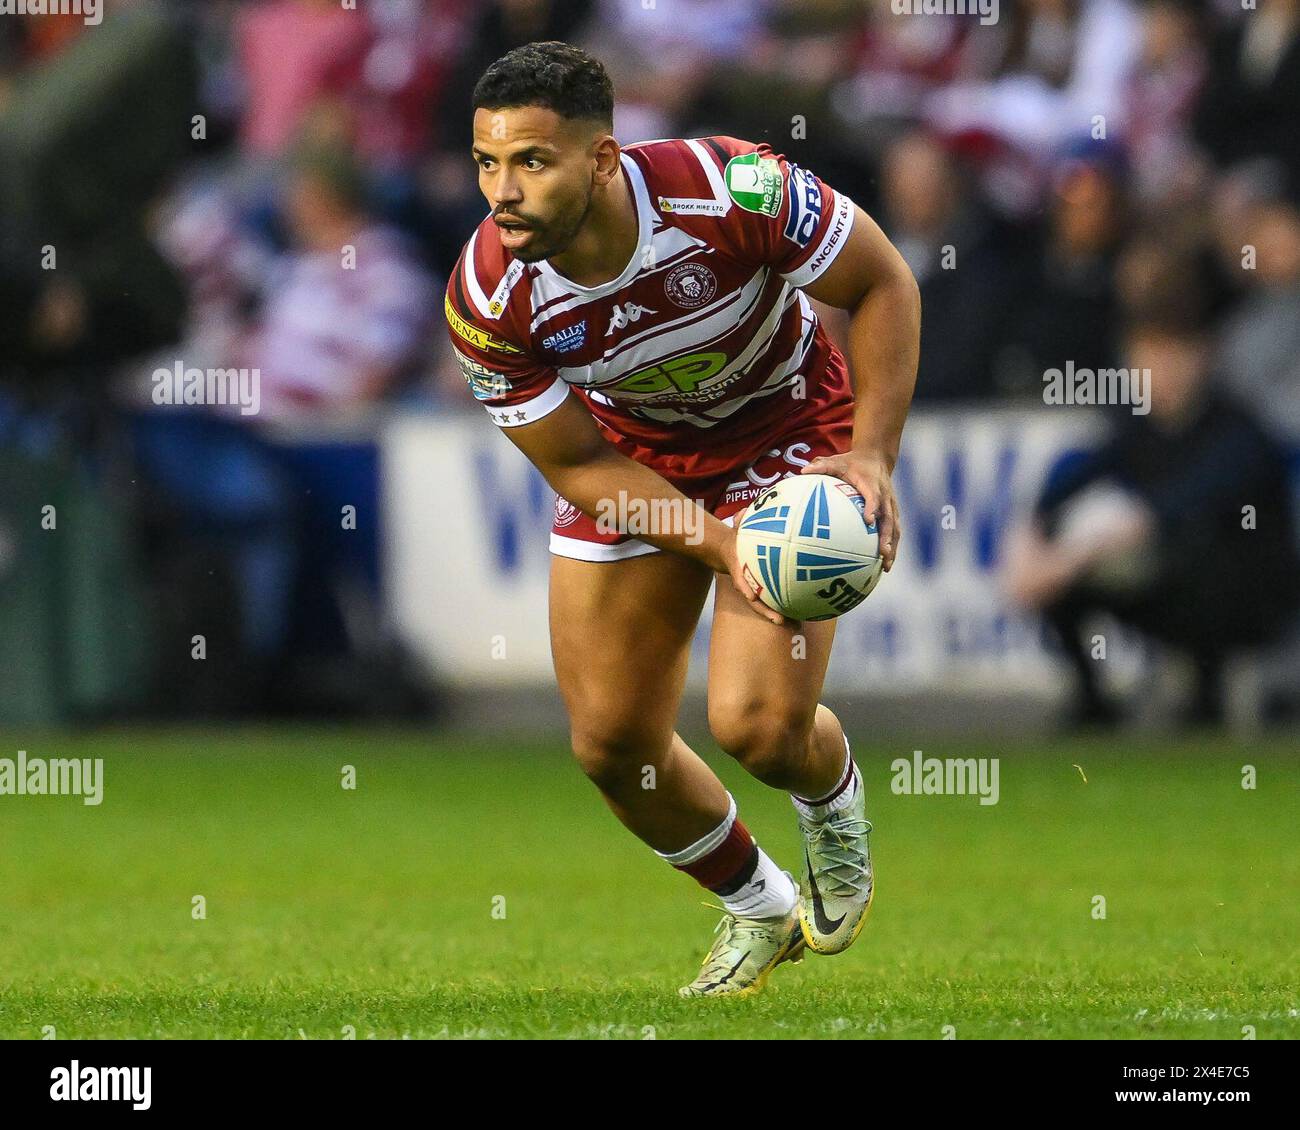 Kruise Leeming of Wigan Warriors makes a break during the Betfred Super League Round 10 match Wigan Warriors vs Catalans Dragons at DW Stadium, Wigan, United Kingdom, 2nd May 2024  (Photo by Craig Thomas/News Images) Stock Photo